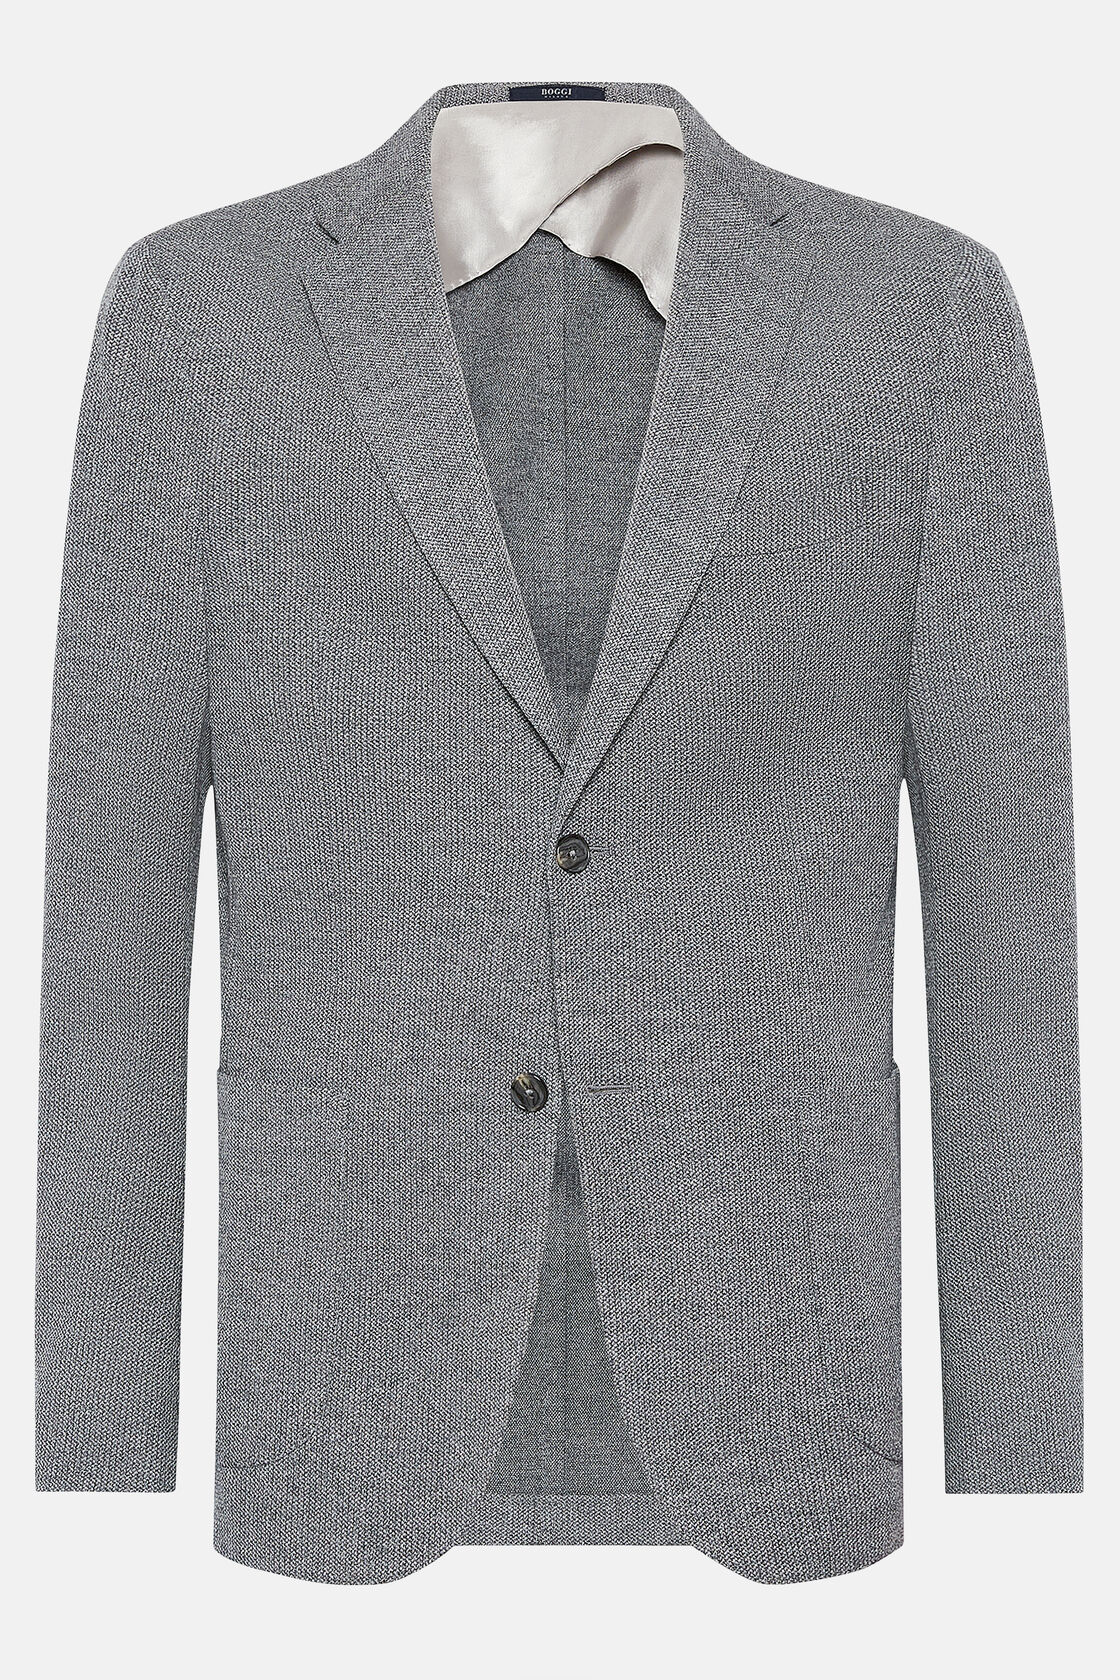 B Jersey Grey Jacket In Cotton, Wool and Polyester, Grey, hi-res